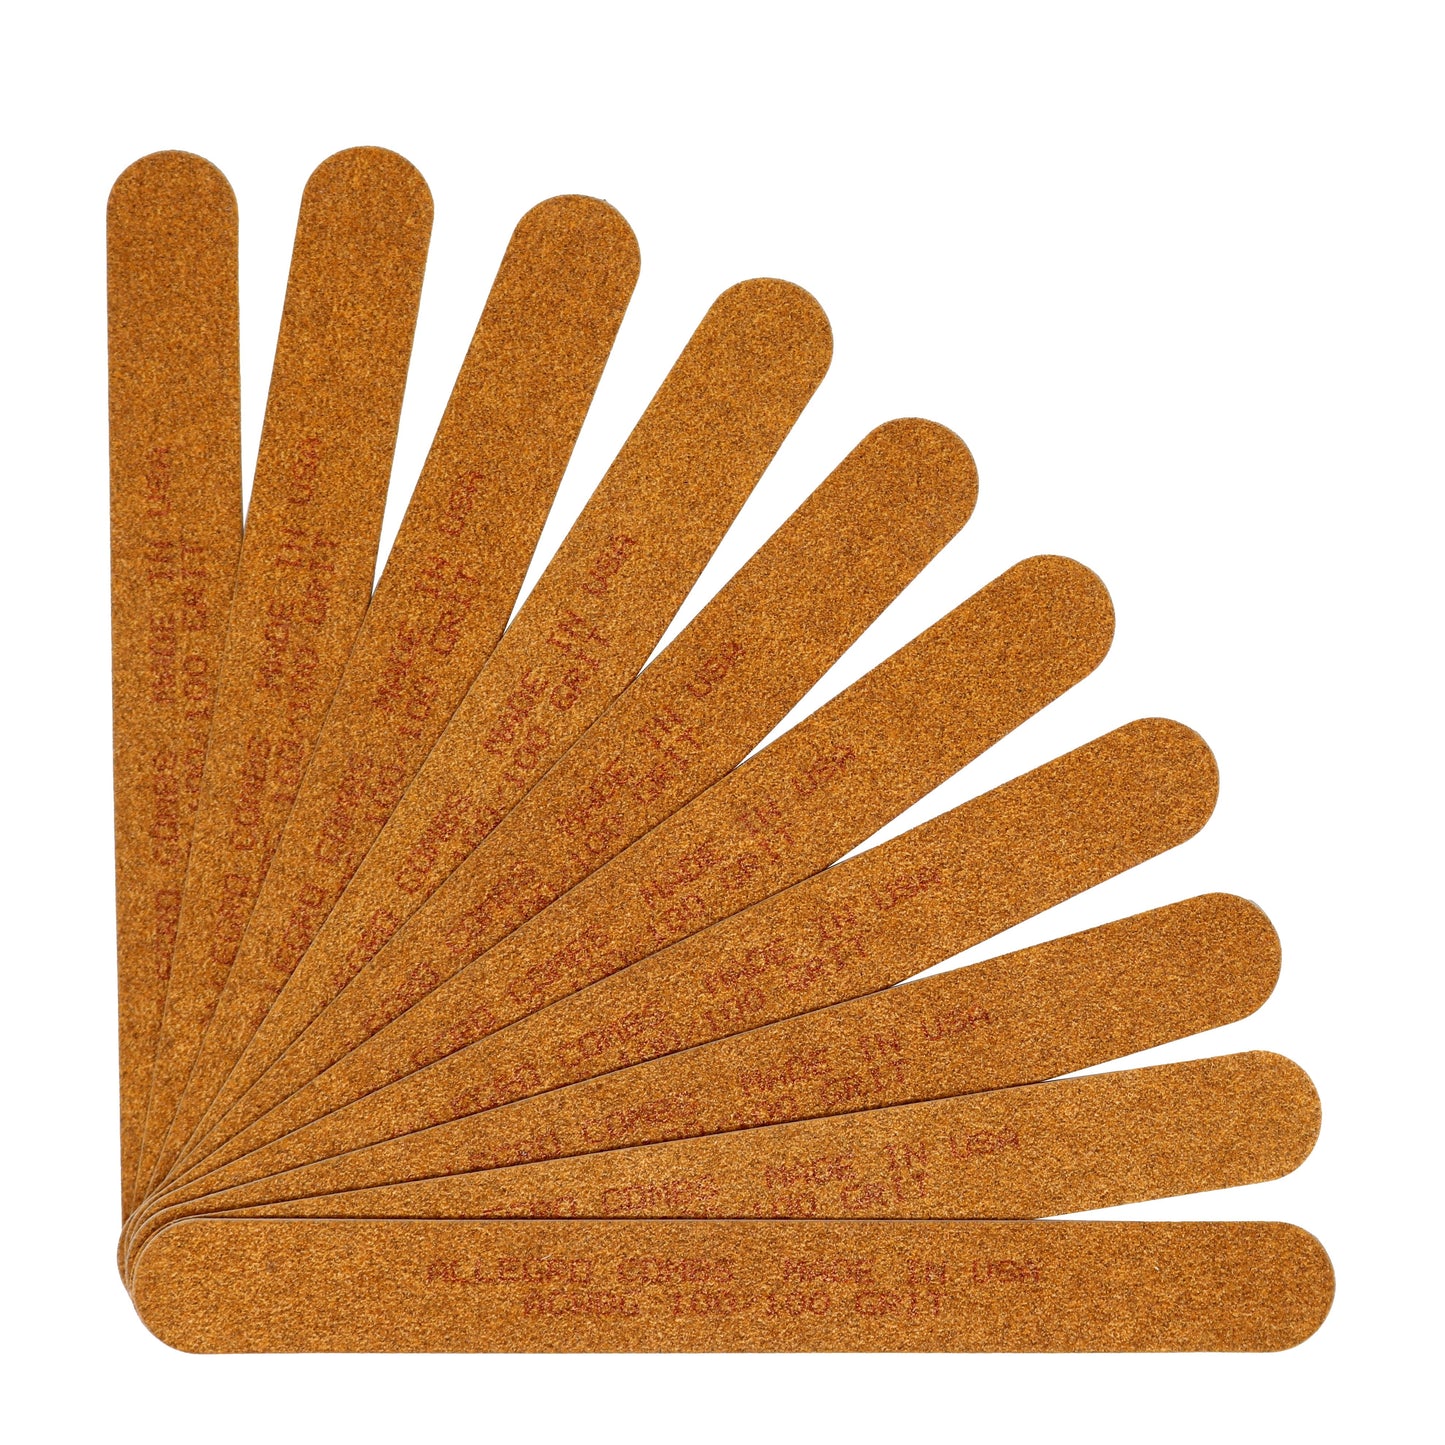 Allegro Combs 7 In. Nail Files Double Sided Wooden Emery Boards For Natural and Acrylic Thin Grits 100,180, 120/240,  10 Pcs.